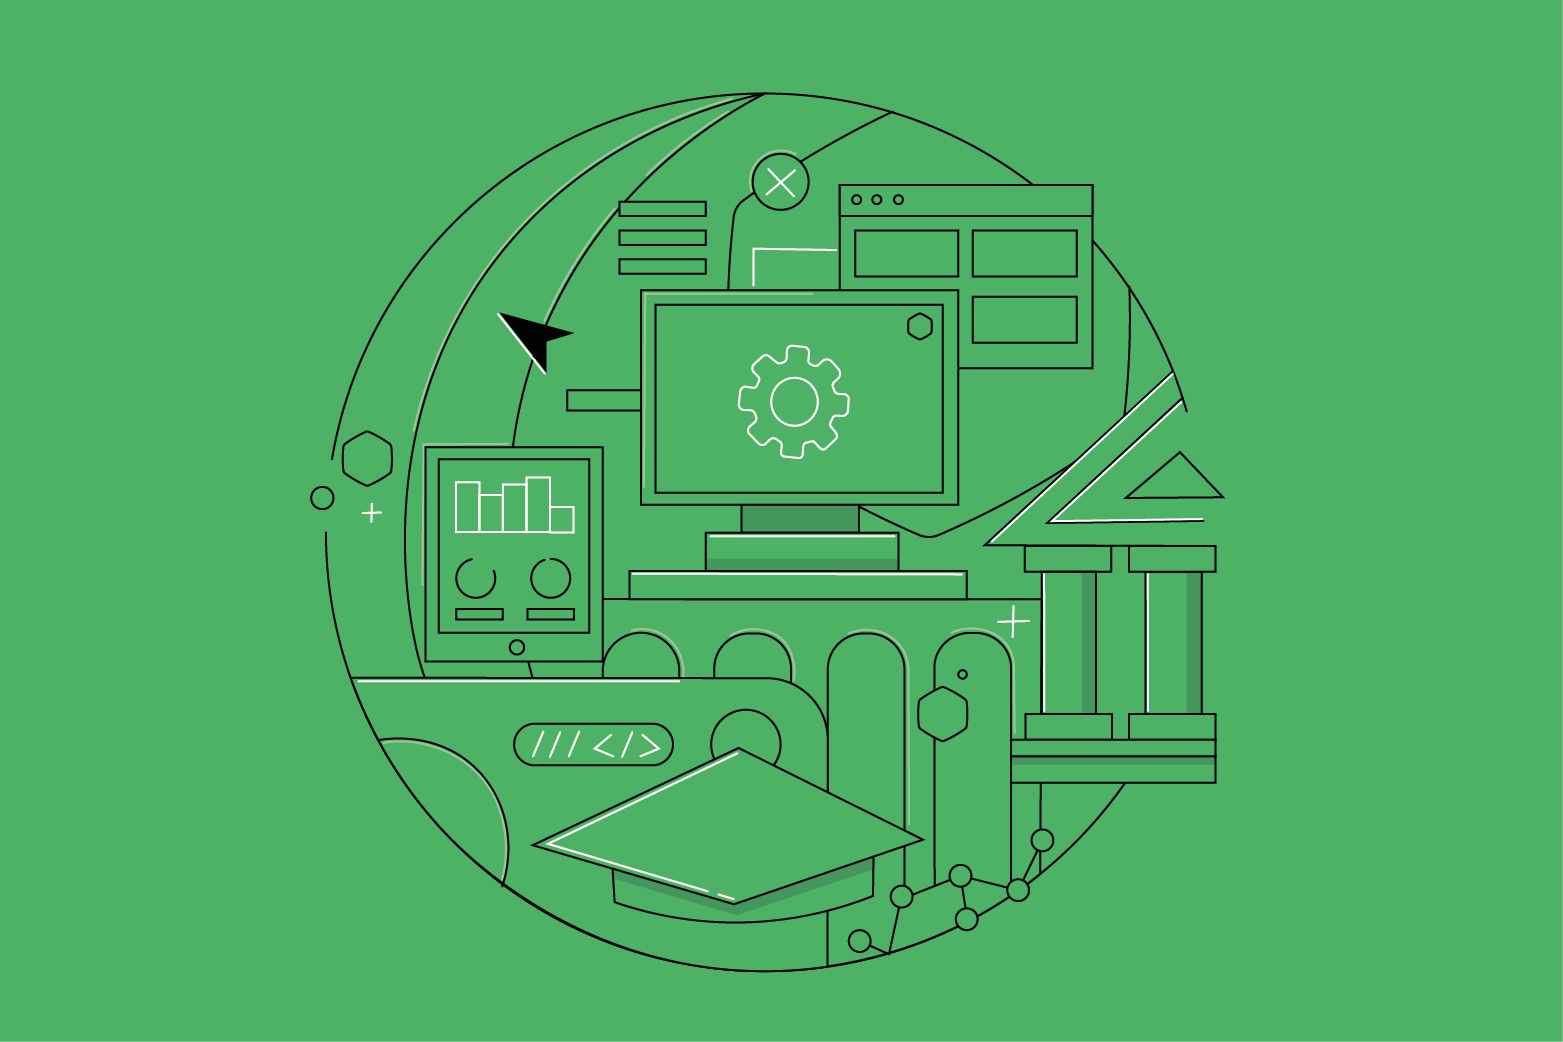 An illustration of a circle containing items like a graduation cap and a desktop monitor